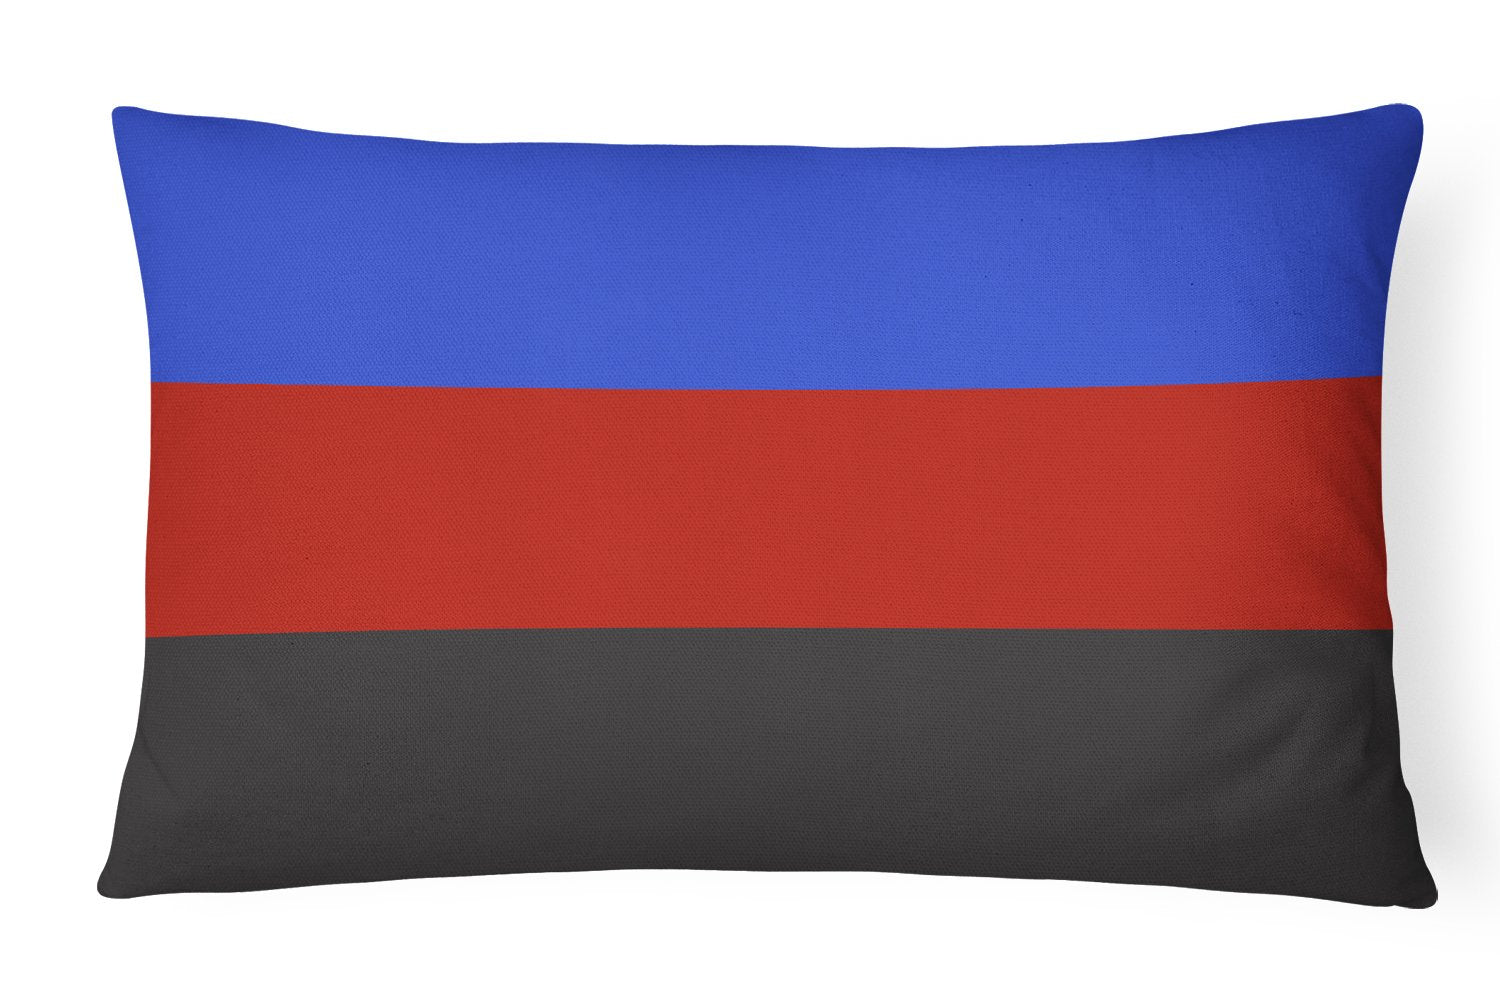 Buy this Polyamorous Pride Canvas Fabric Decorative Pillow